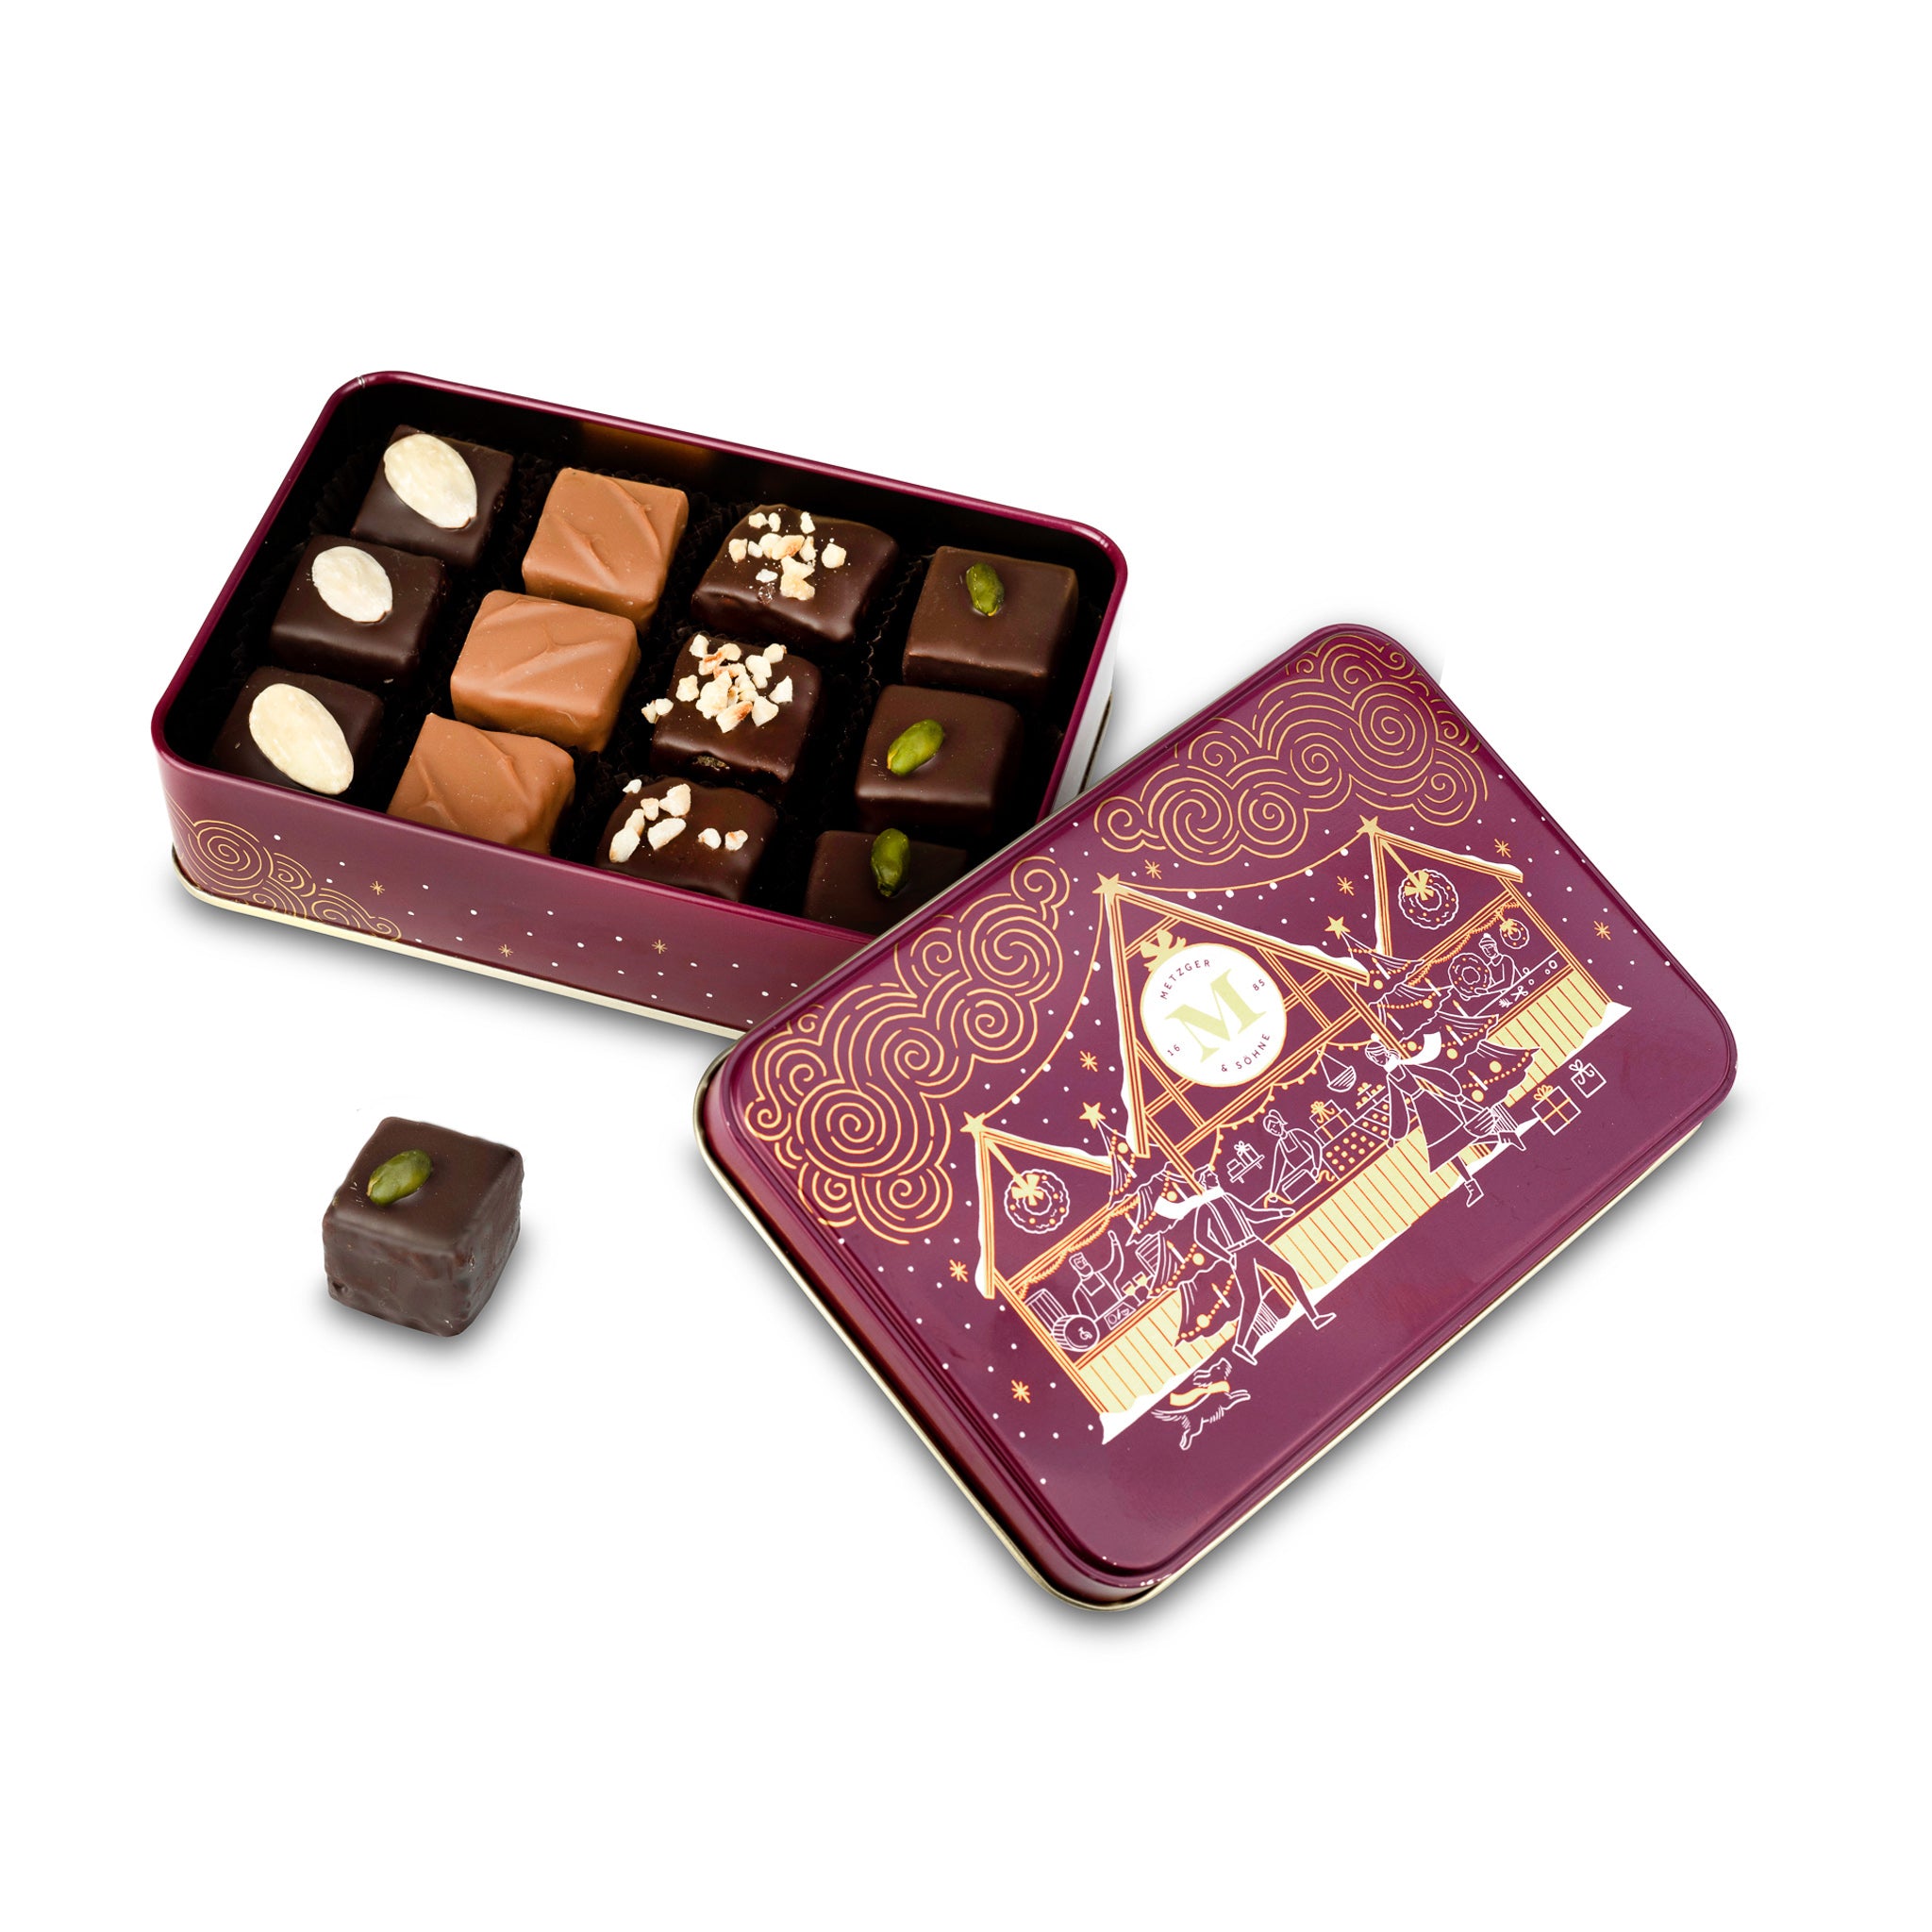 Christmas tin in bordeaux red with Viennese market design filled with 12 delicious Lebkuchen pralines: popular types such as juicy almond marzipan, fruity aranzini, hazelnut-raisin and other fruity or nutty variations.